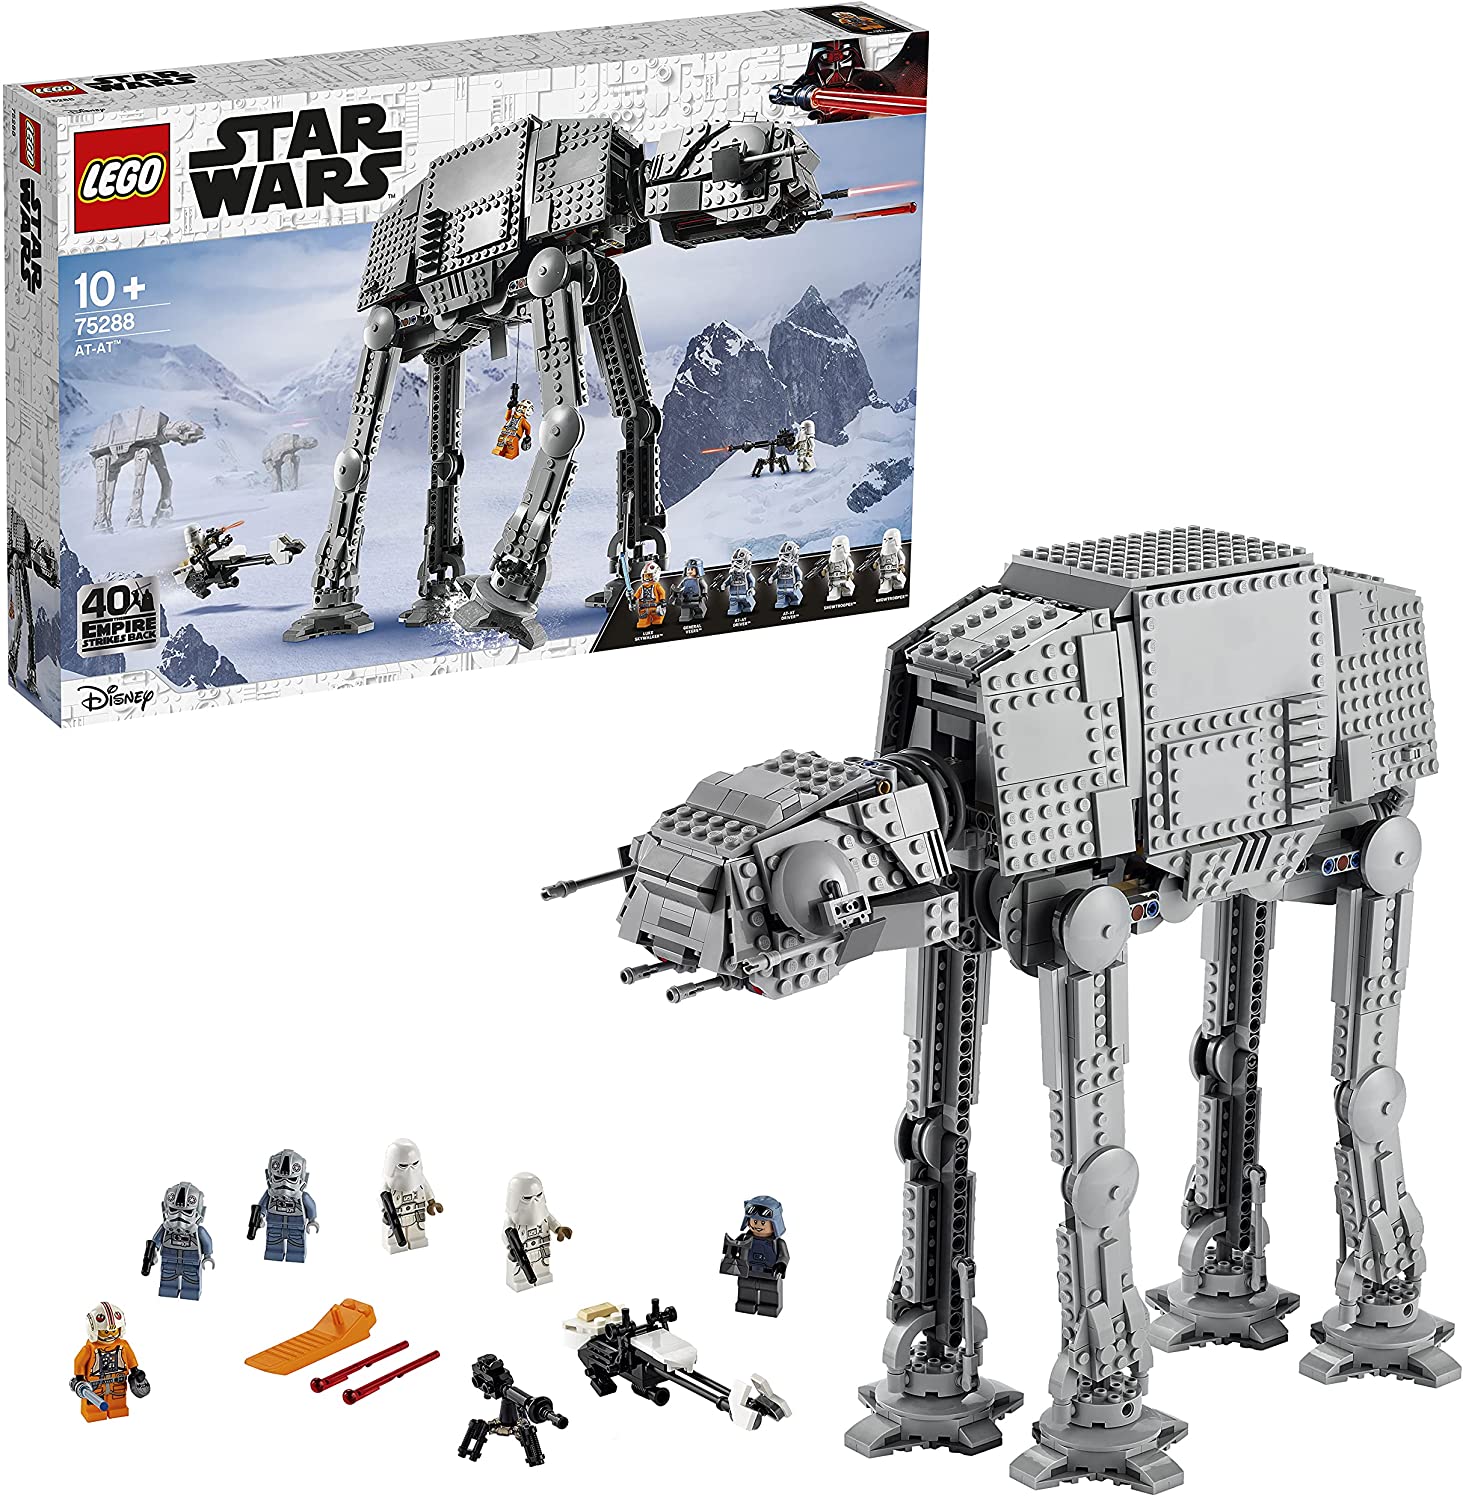 LEGO 75288 Star Wars at-at, Walker Toy, 40th Anniversary Set for Children a